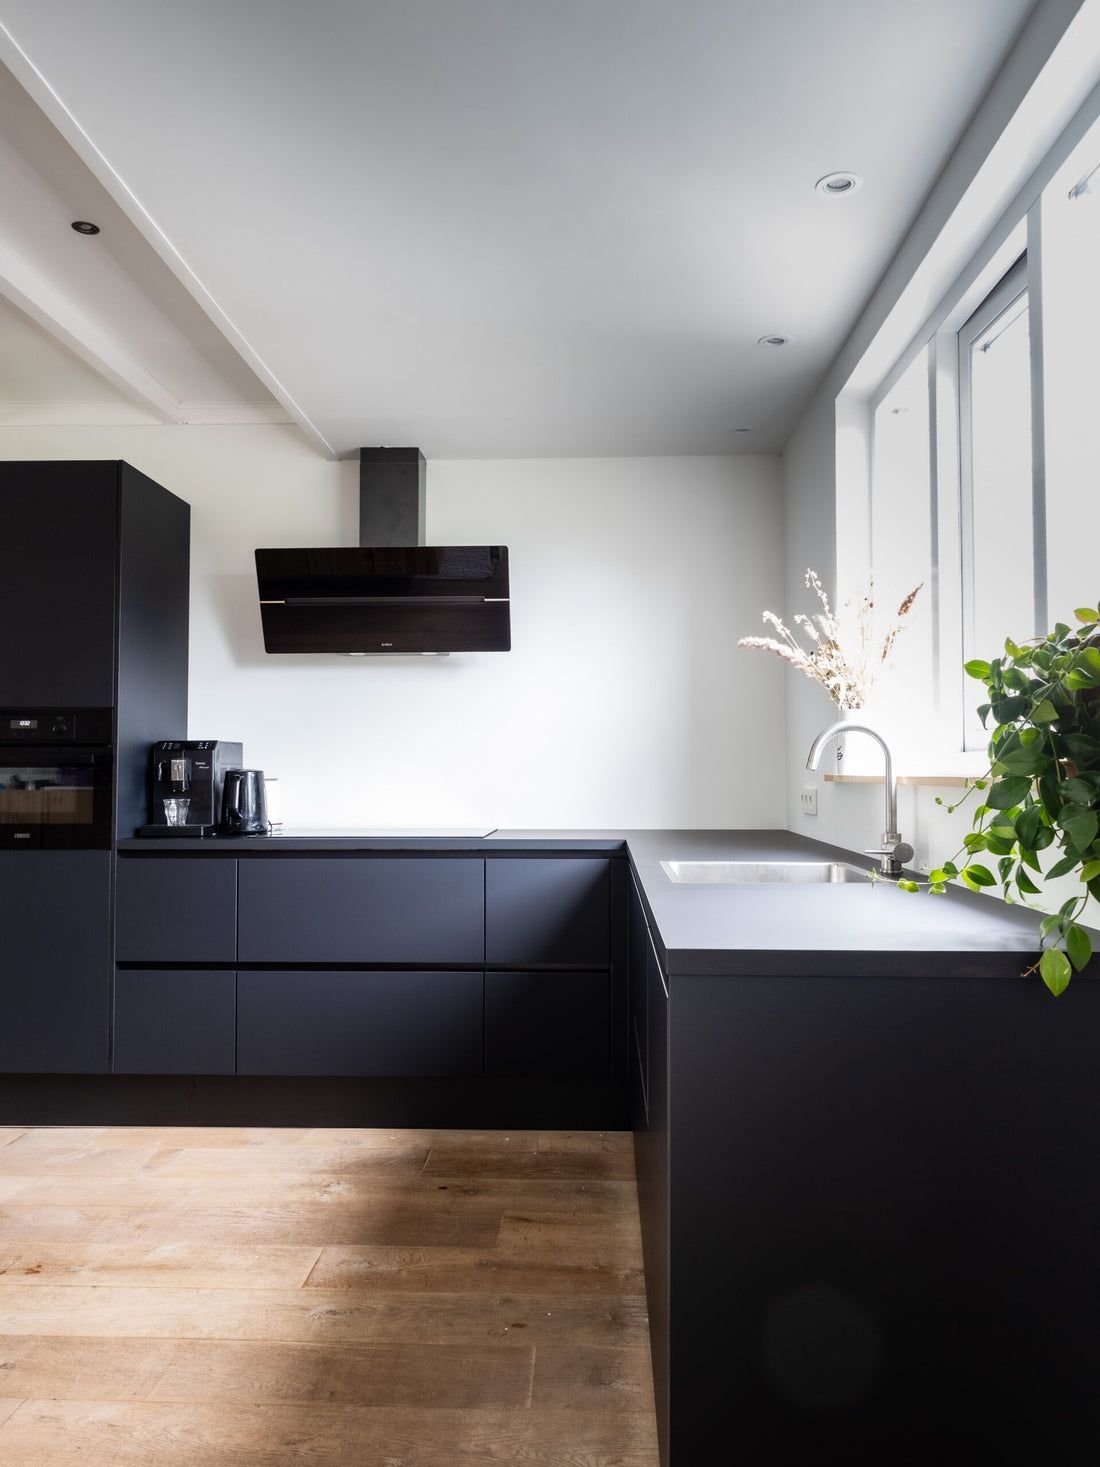 How to choose a kitchen worktop